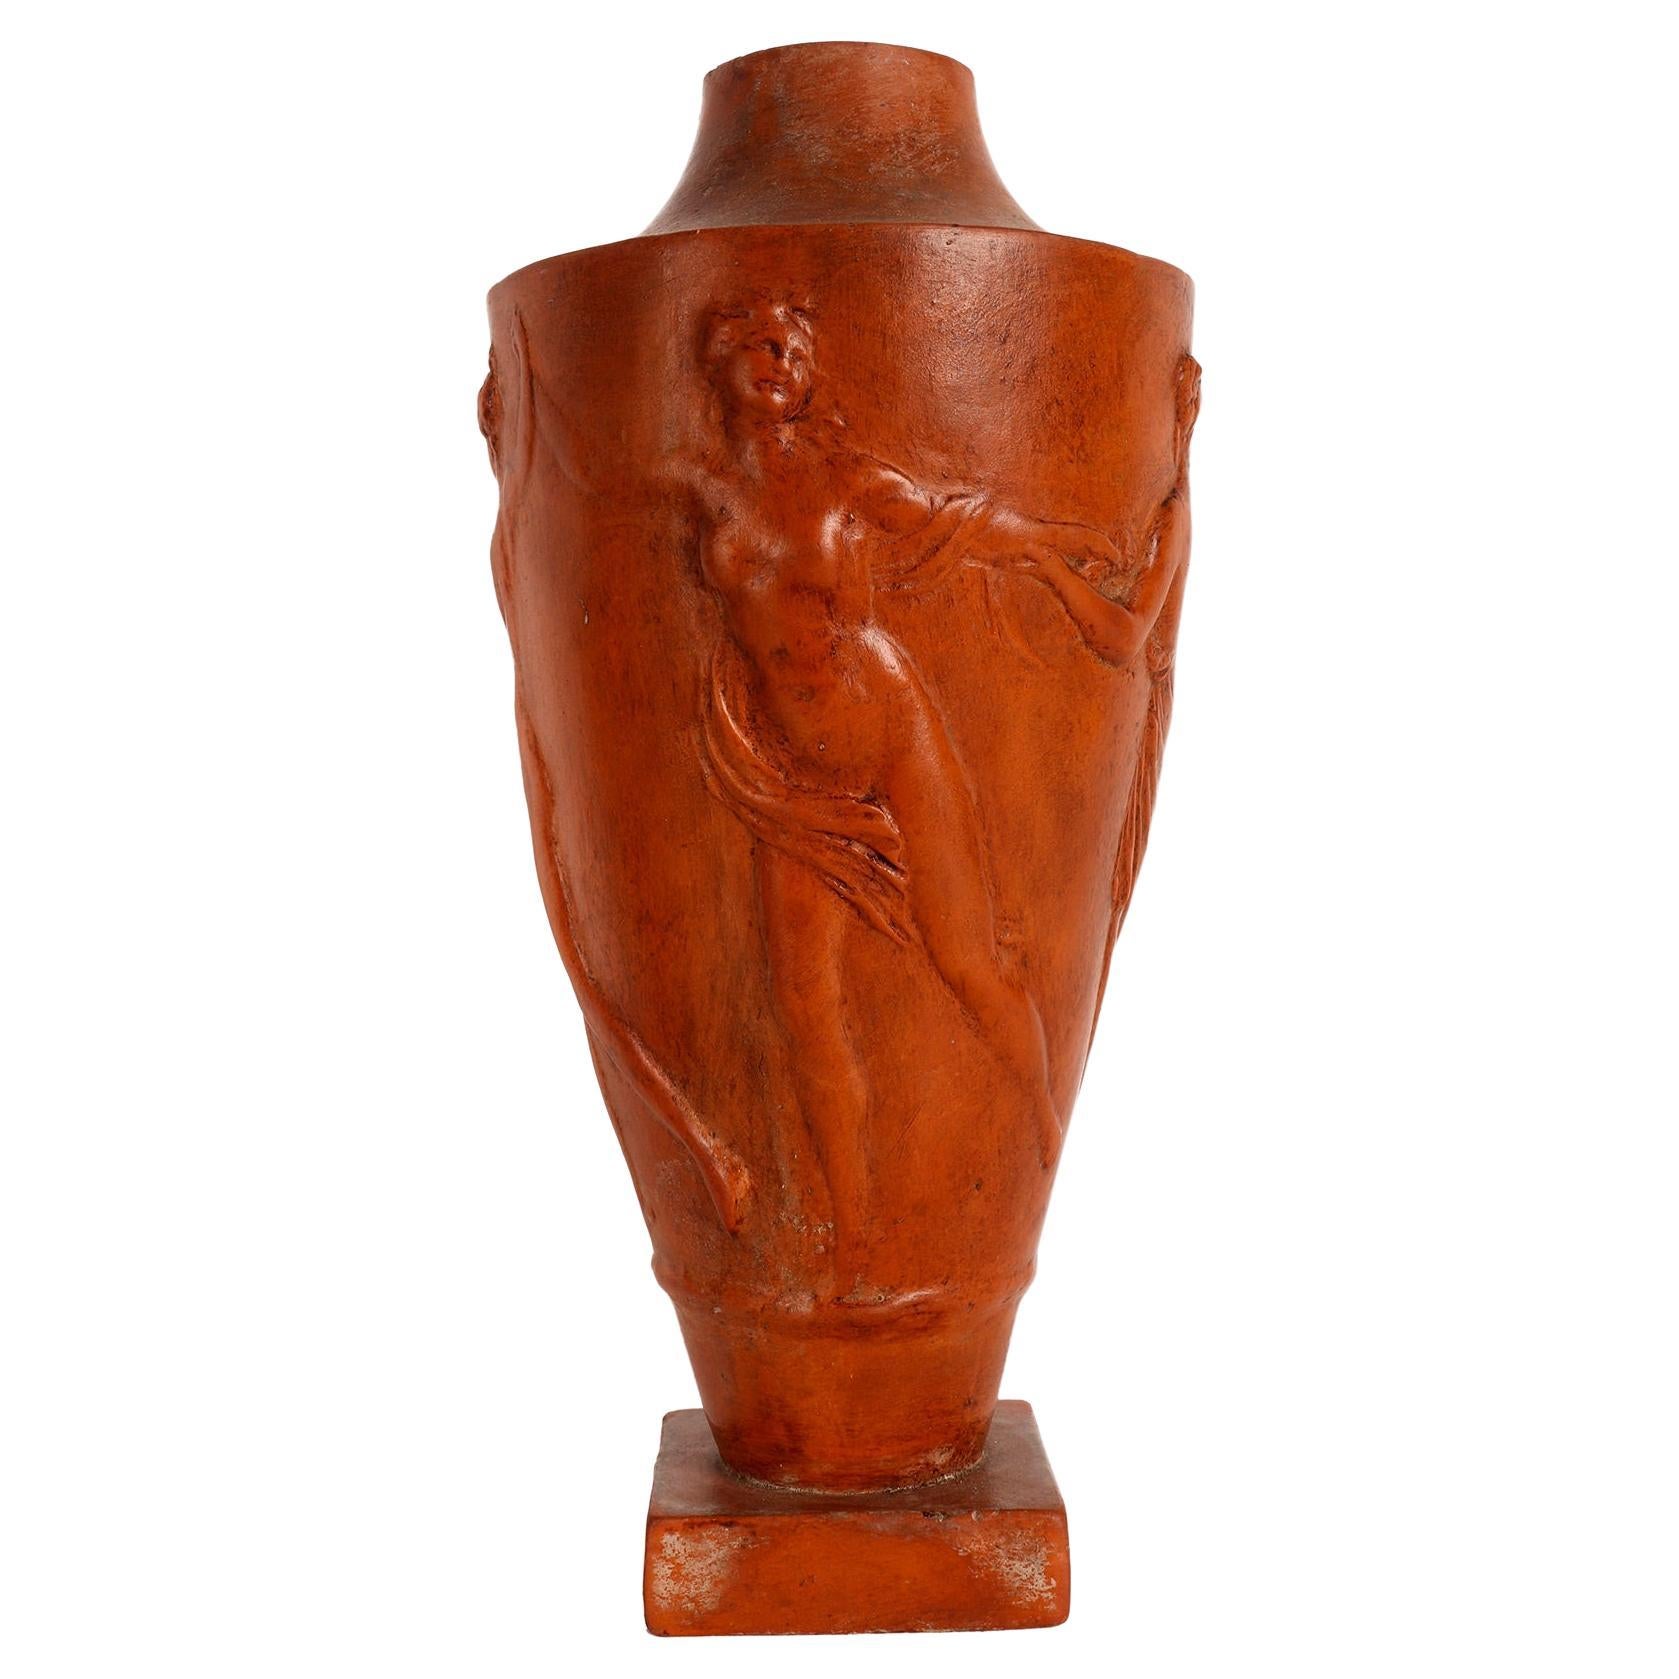 Terracotta vase with satyrs and maenads, France 1920